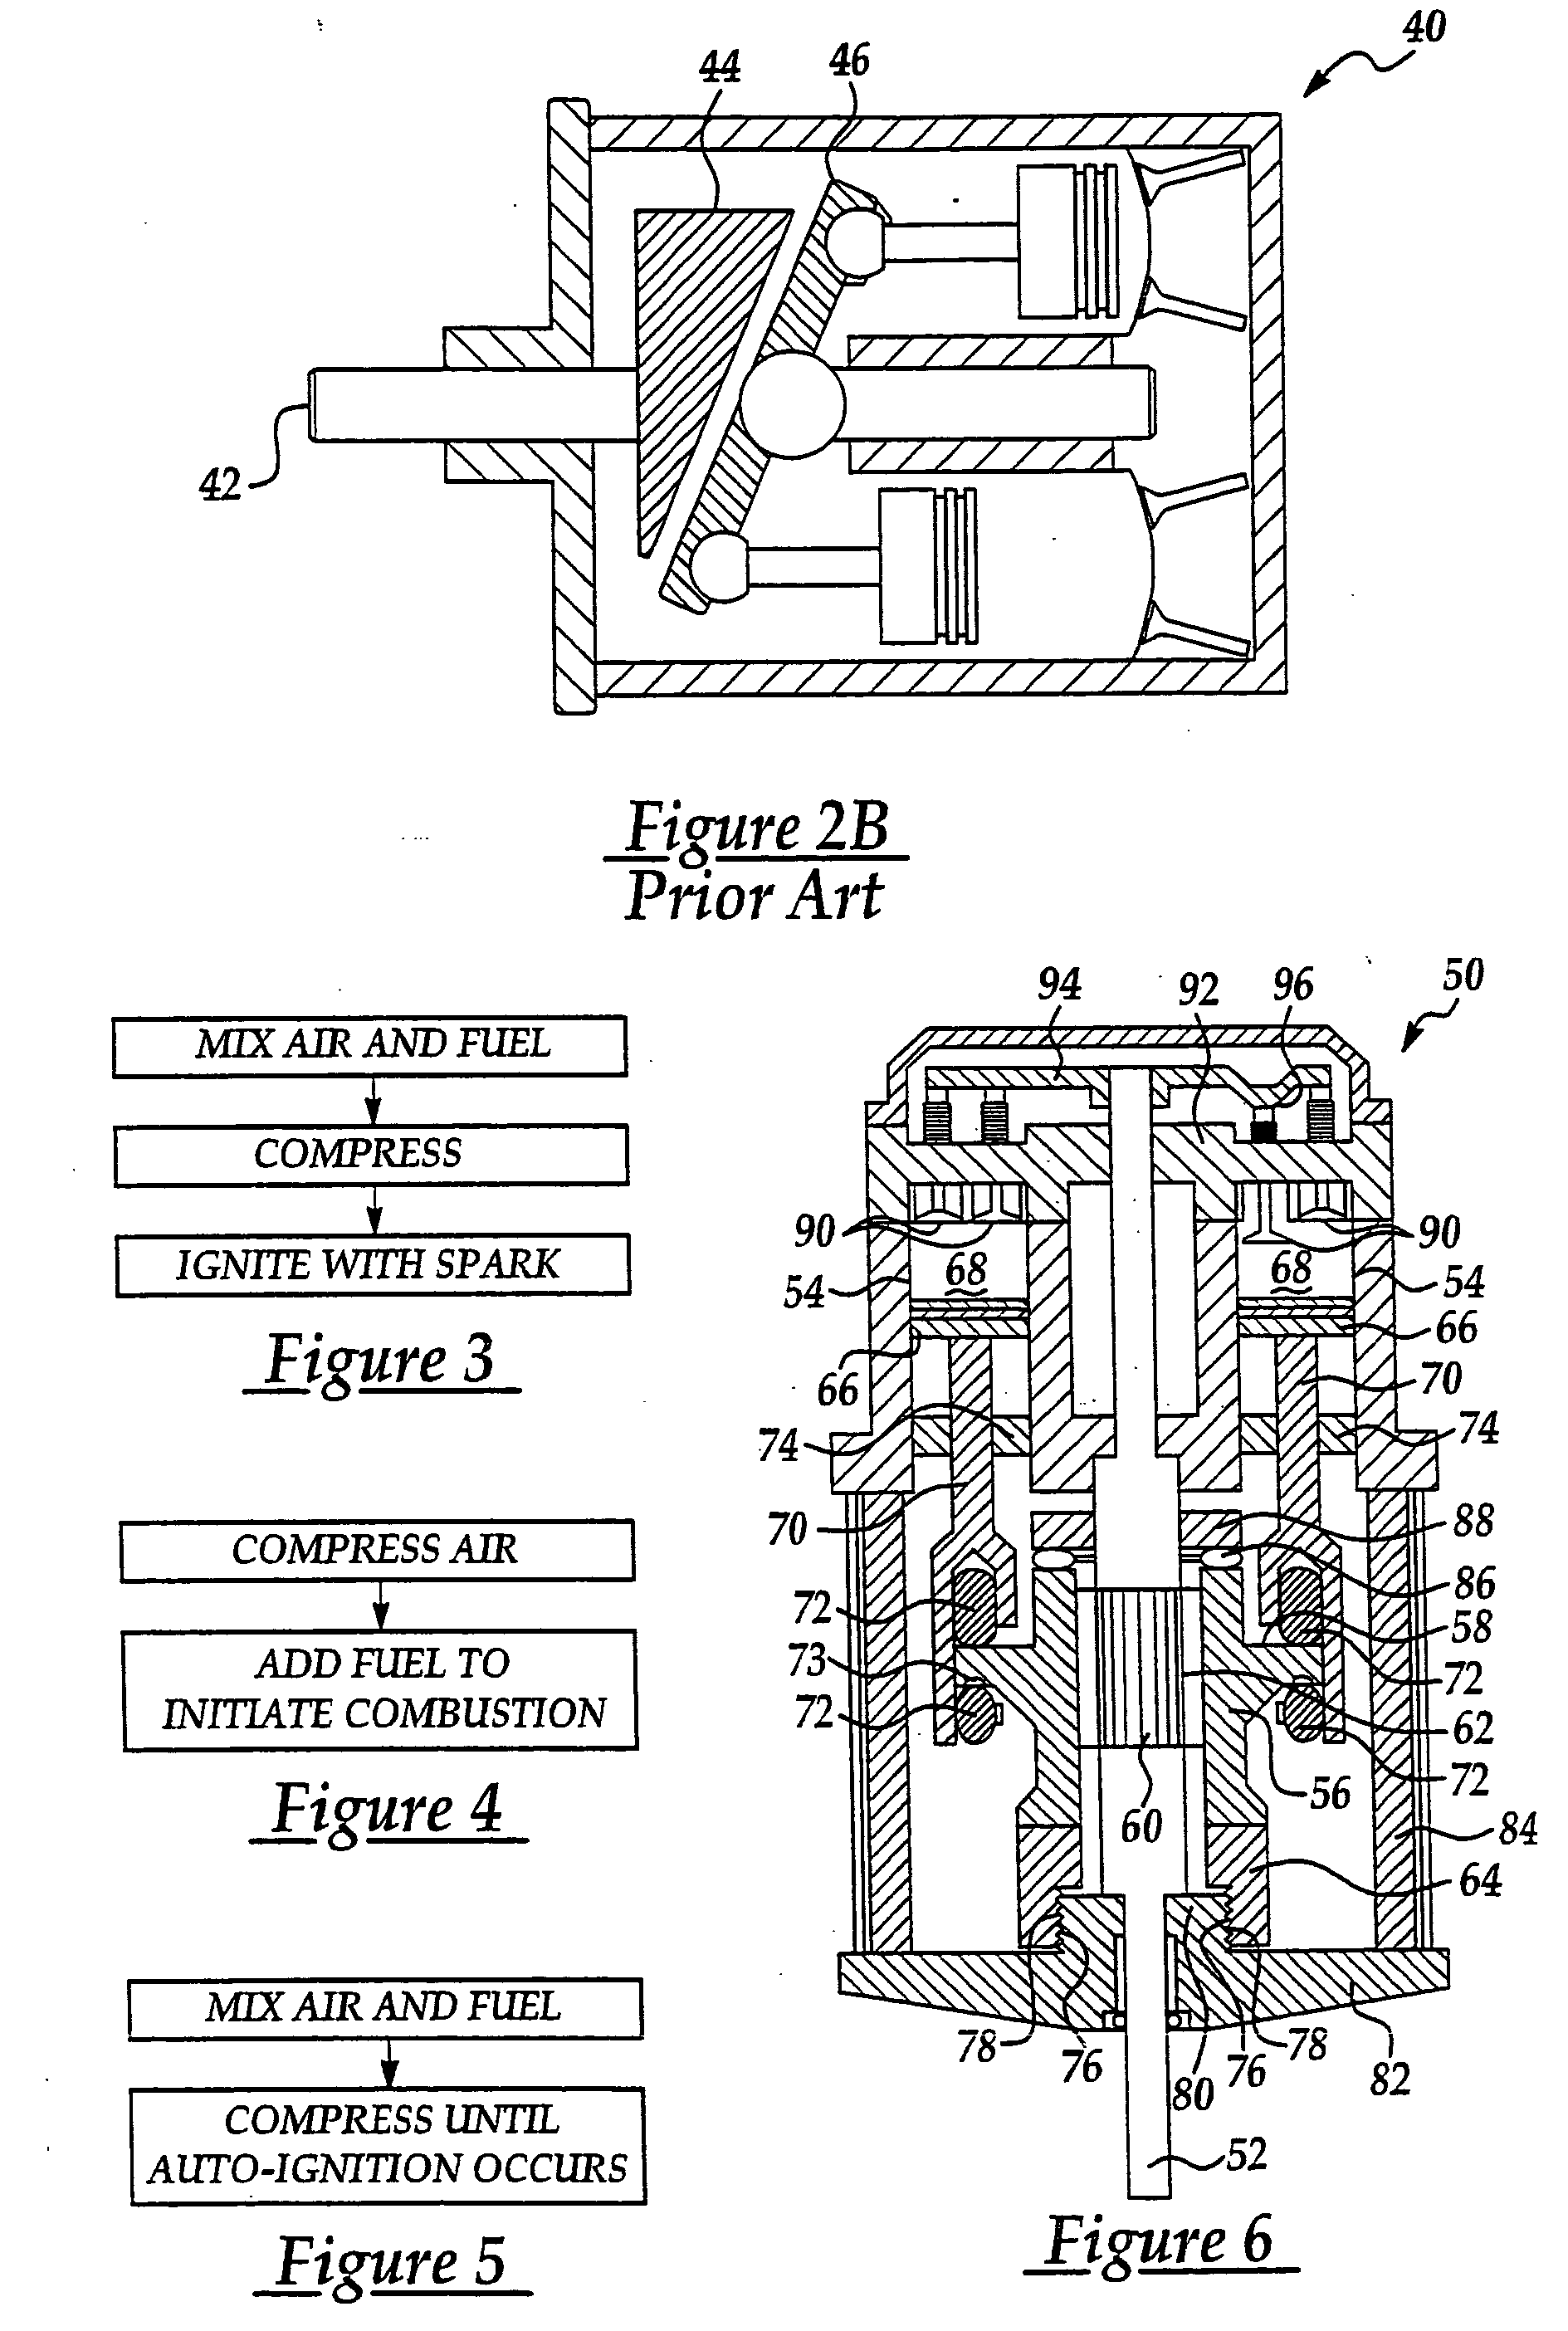 Homogeneous charge compression ignition and barrel engines